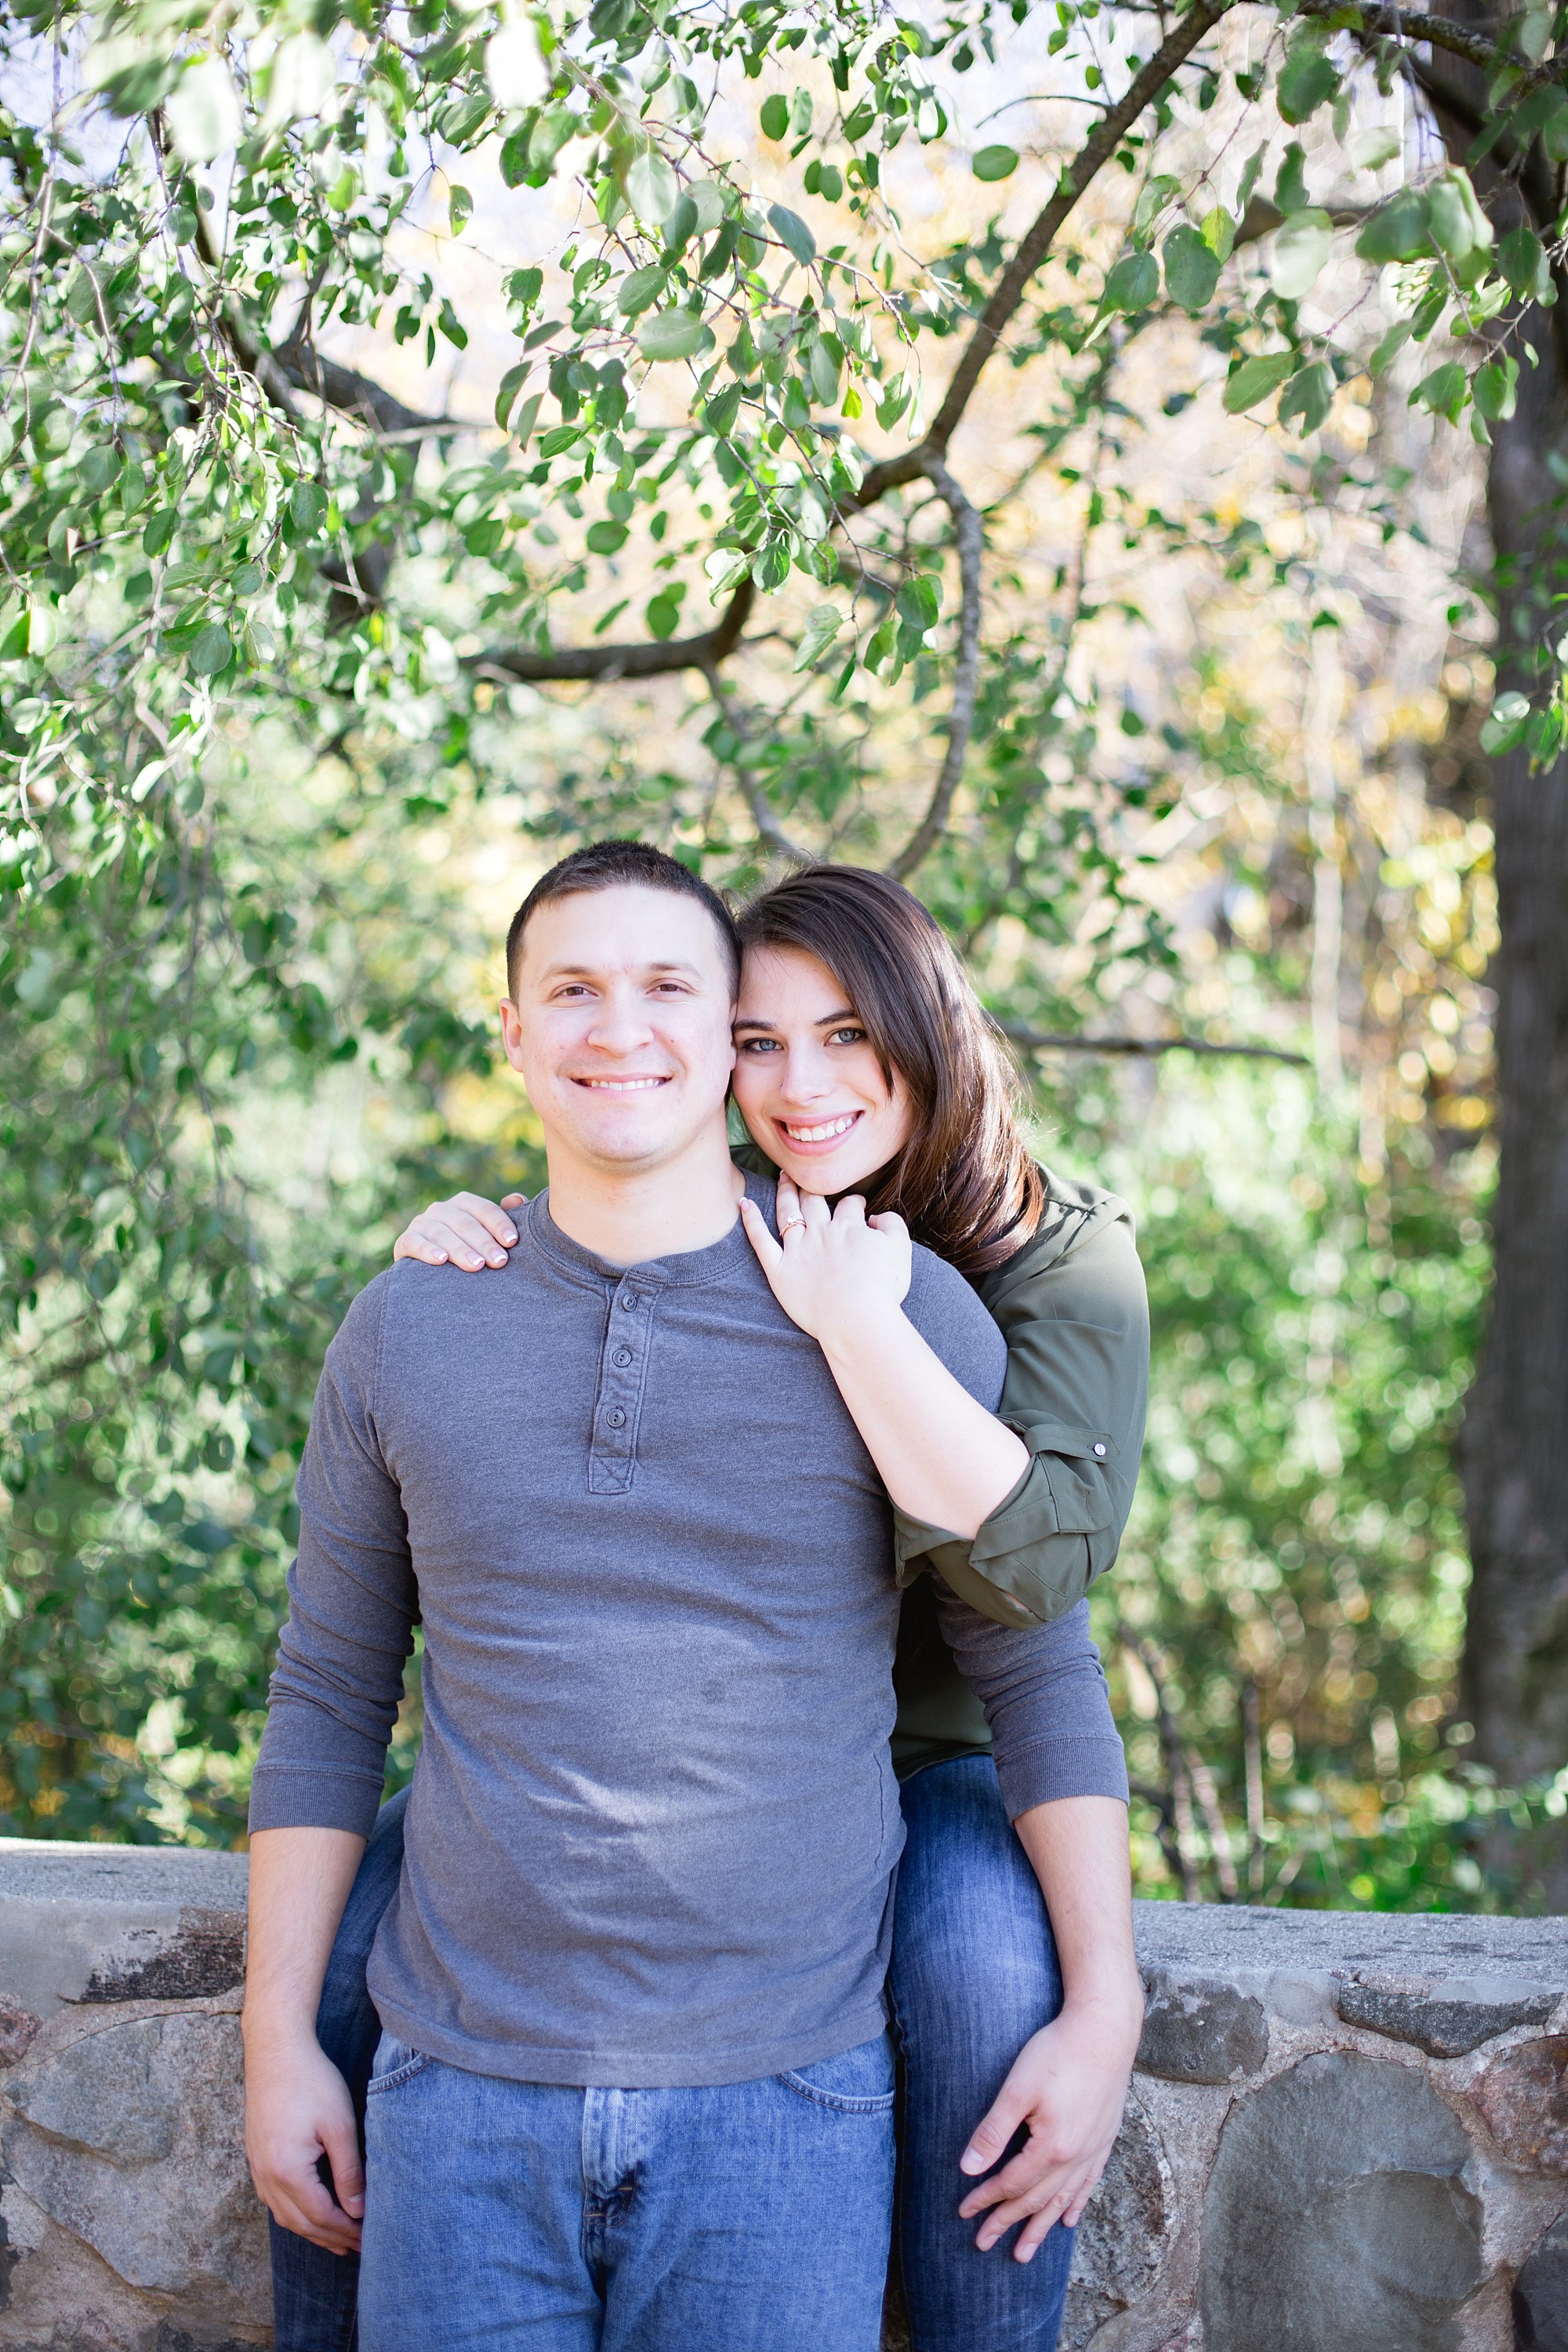 A Fall engagement session at Stoney Creek in Rochester Hills, Michigan by Breanne Rochelle Photography.